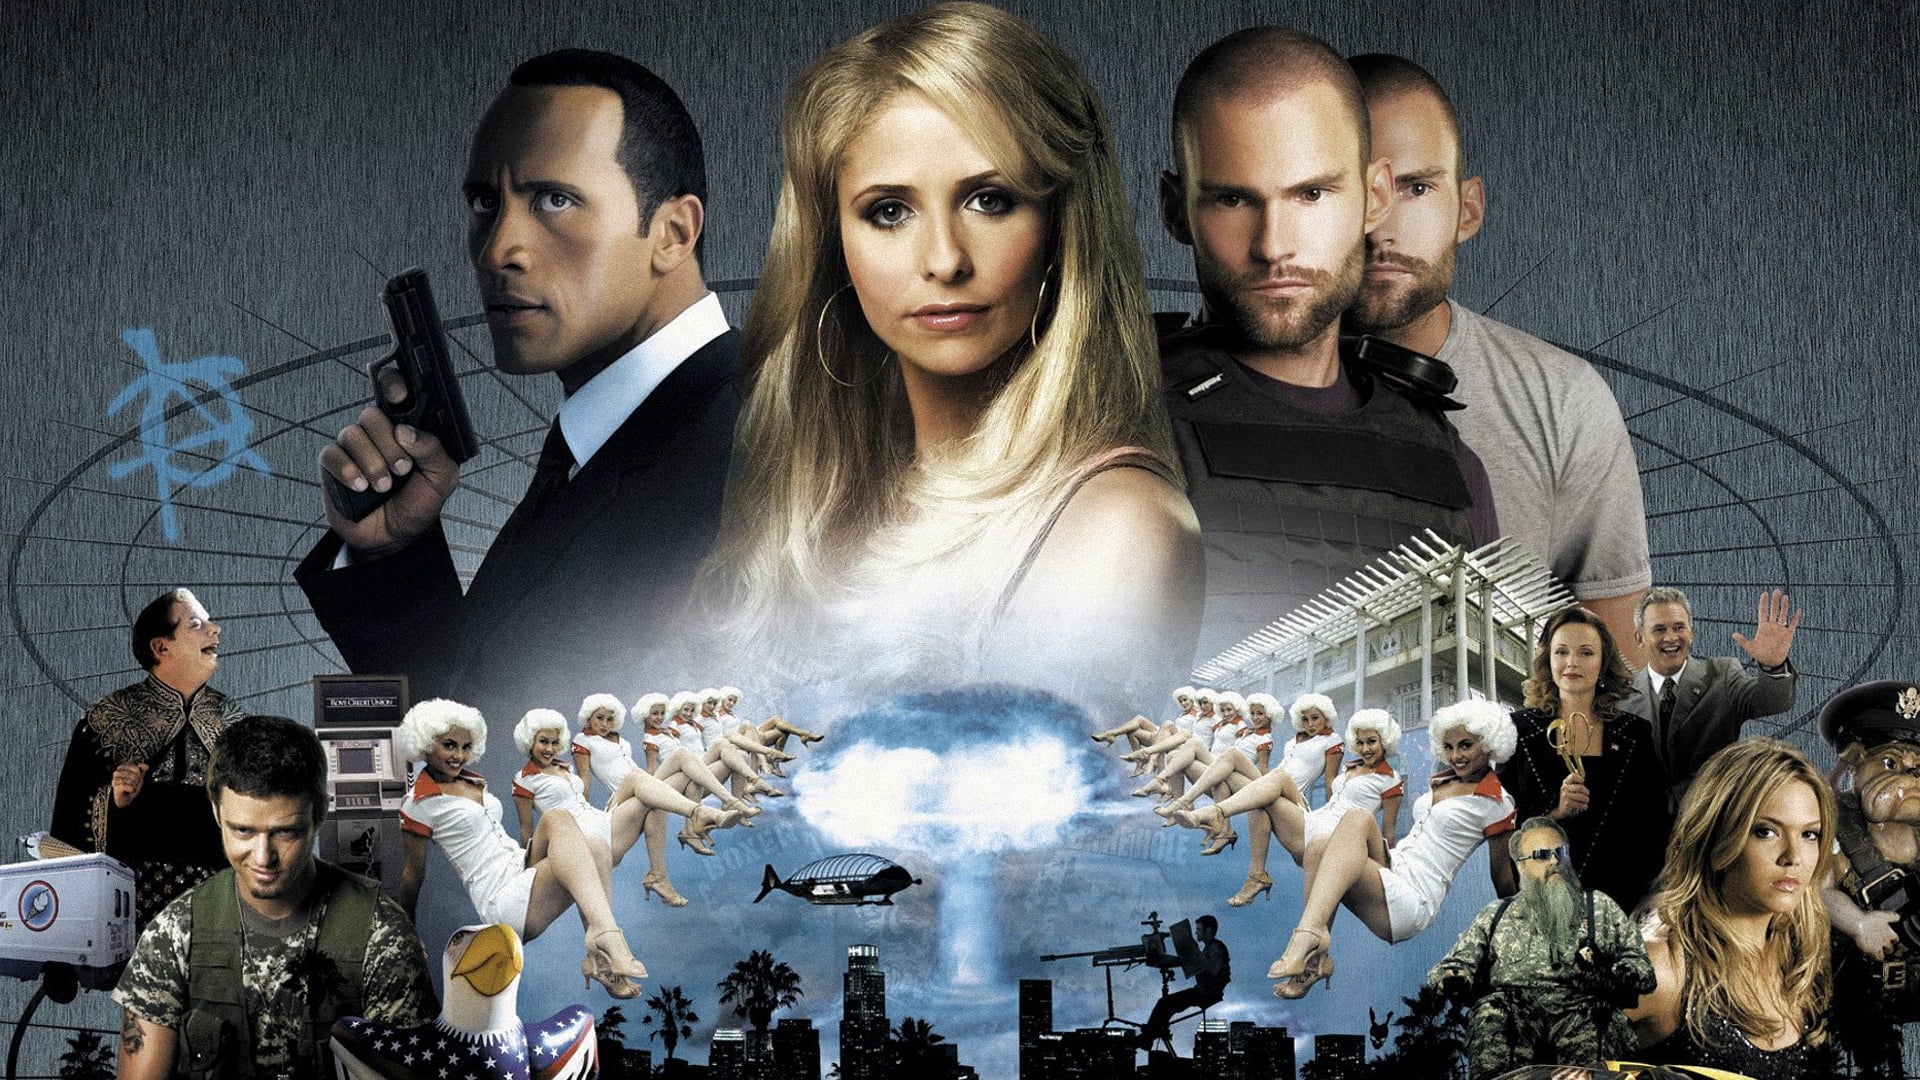 Southland Tales (filme)